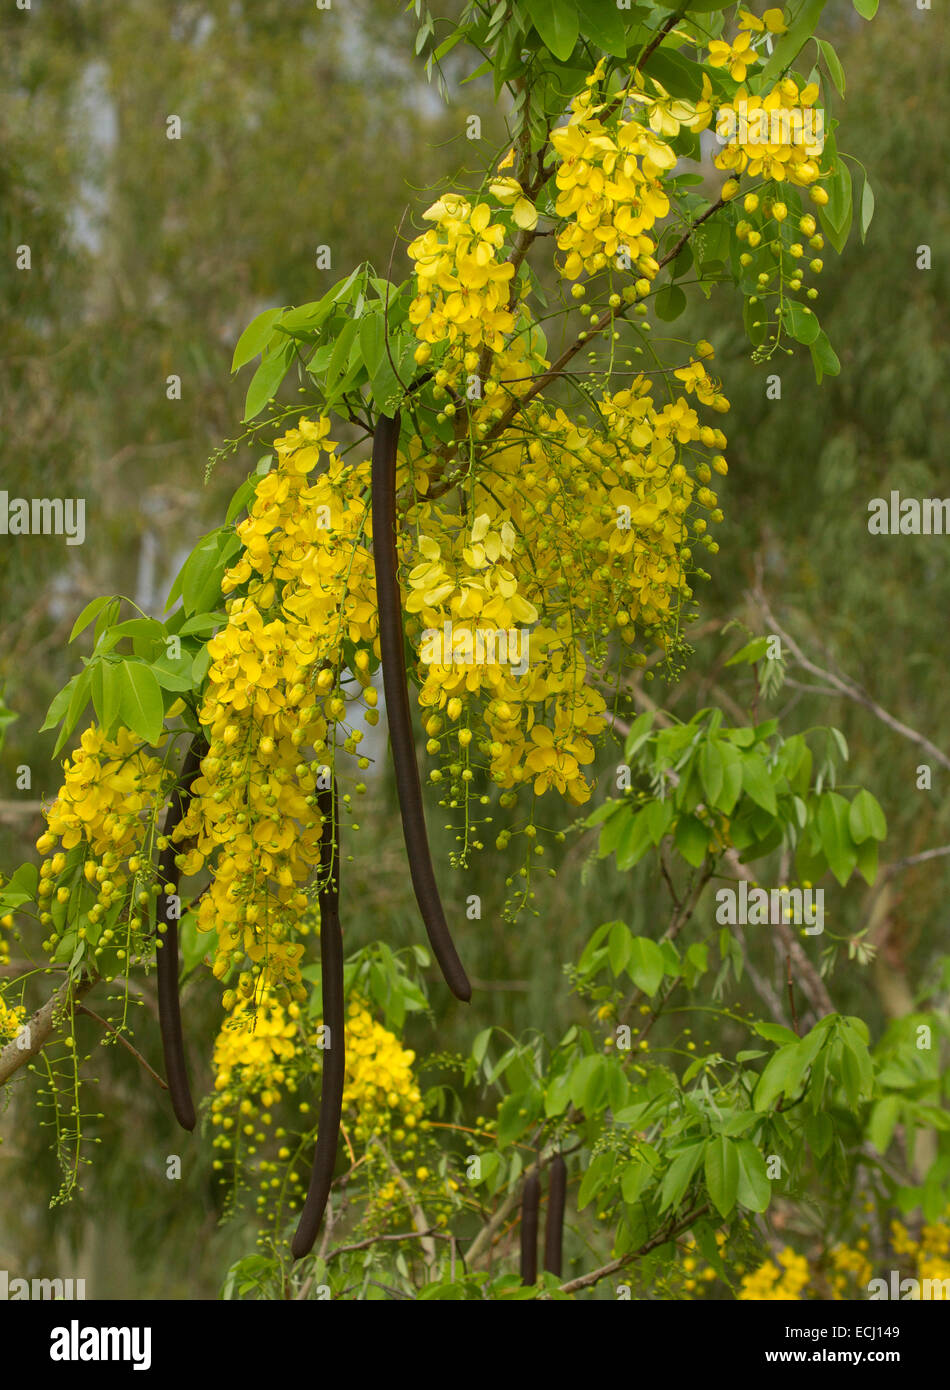 Long racemes of yellow flowers, long seed pods & green leaves of Cassia fistula, Golden Shower tree, floral emblem of Thailand Stock Photo